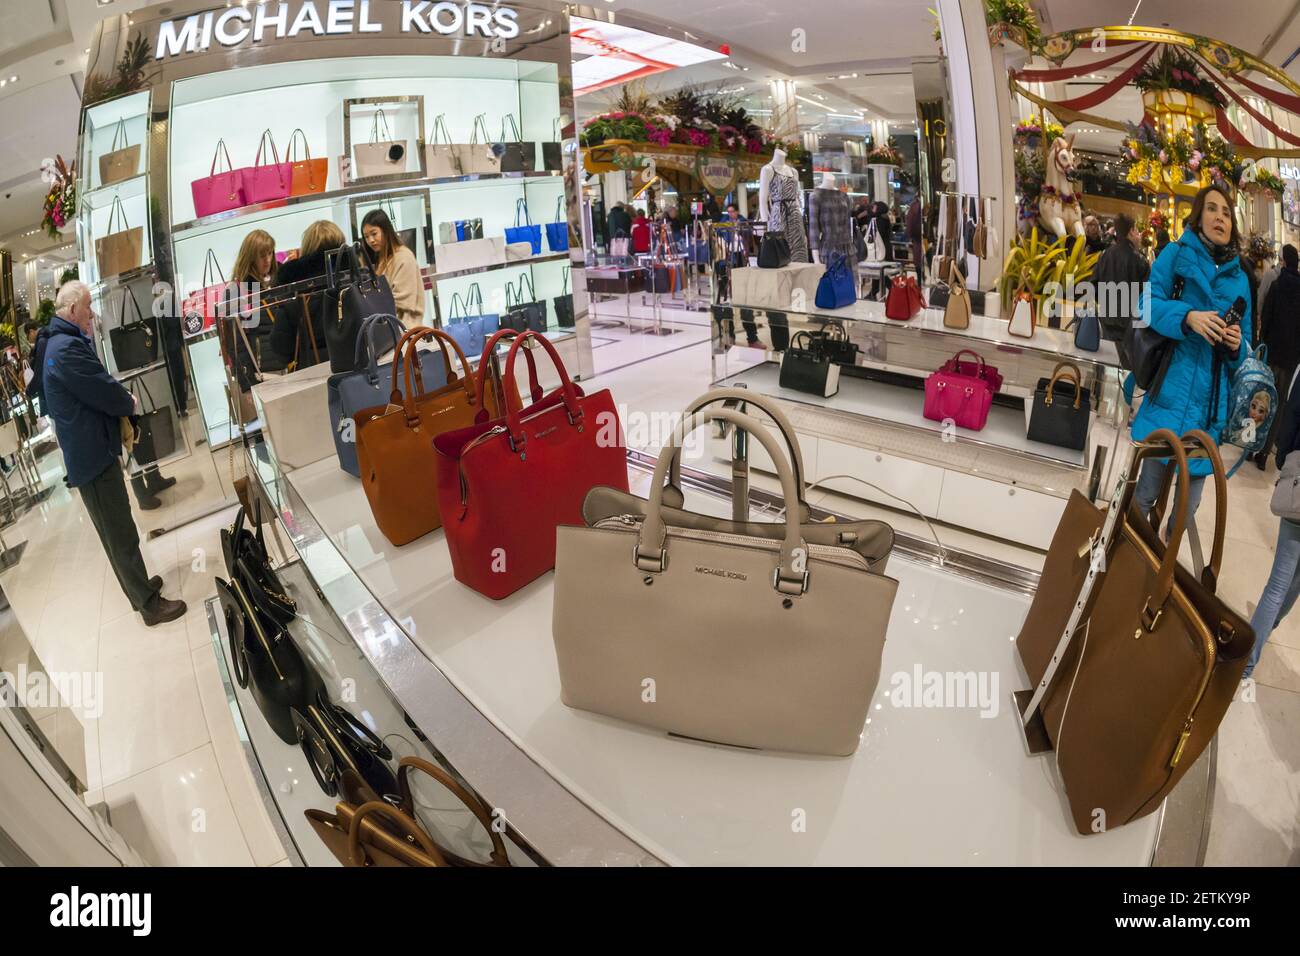 Shoppers browse Michael Kors handbags in the Macy's Herald Square flagship  store on Sunday, March 26, 2017. (Photo by Richard B. Levine) *** Please  Use Credit from Credit Field *** Stock Photo - Alamy